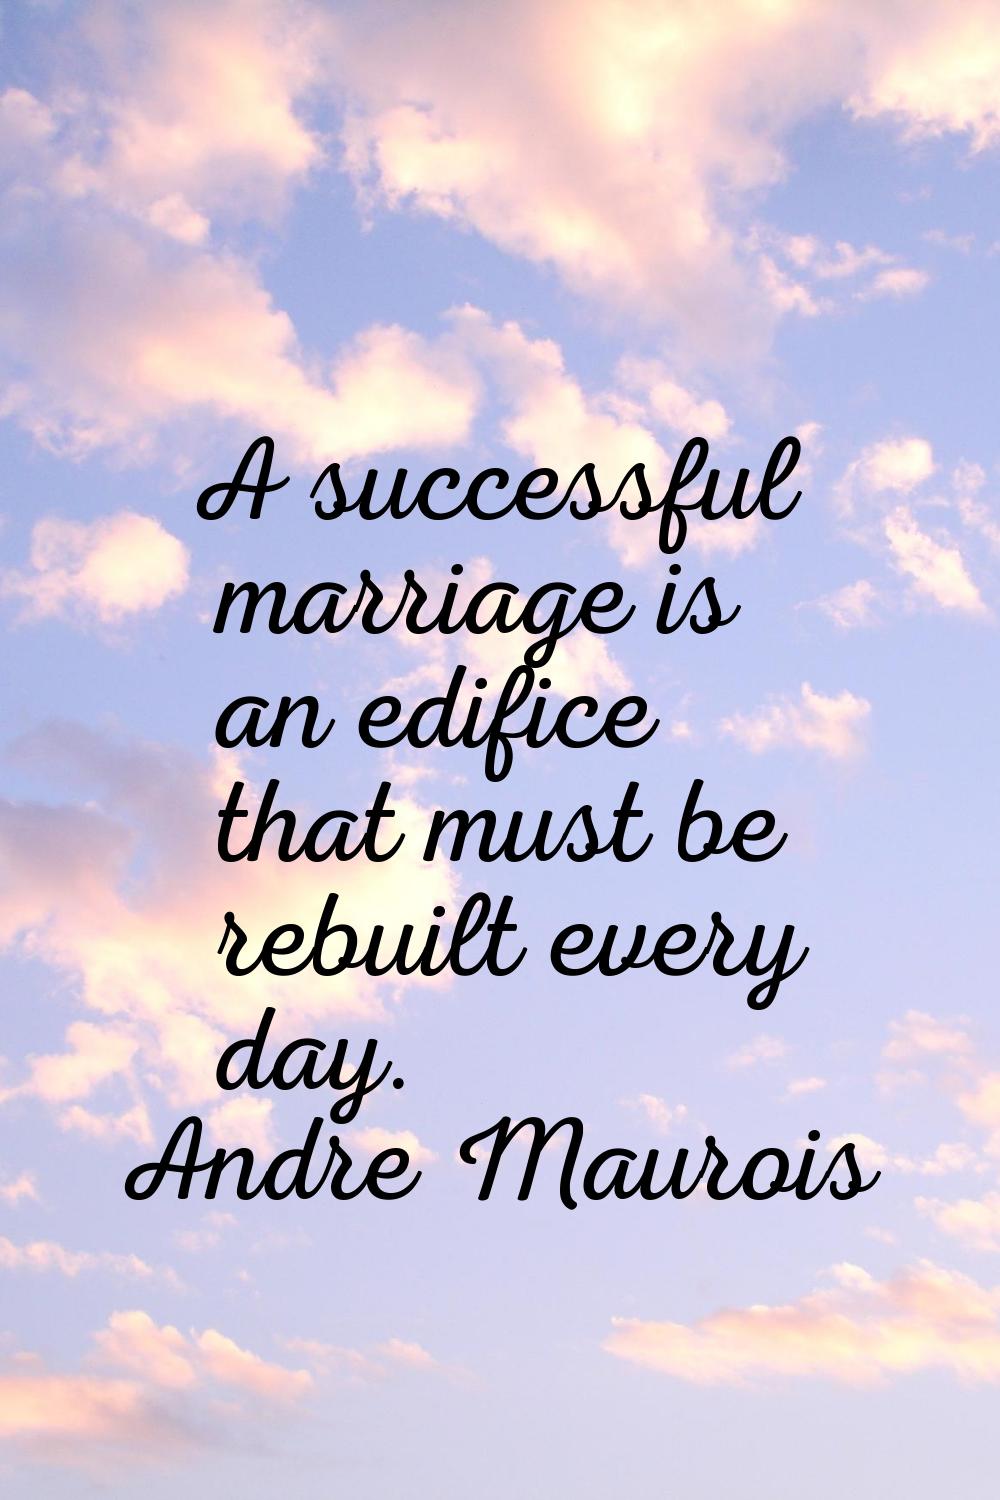 A successful marriage is an edifice that must be rebuilt every day.